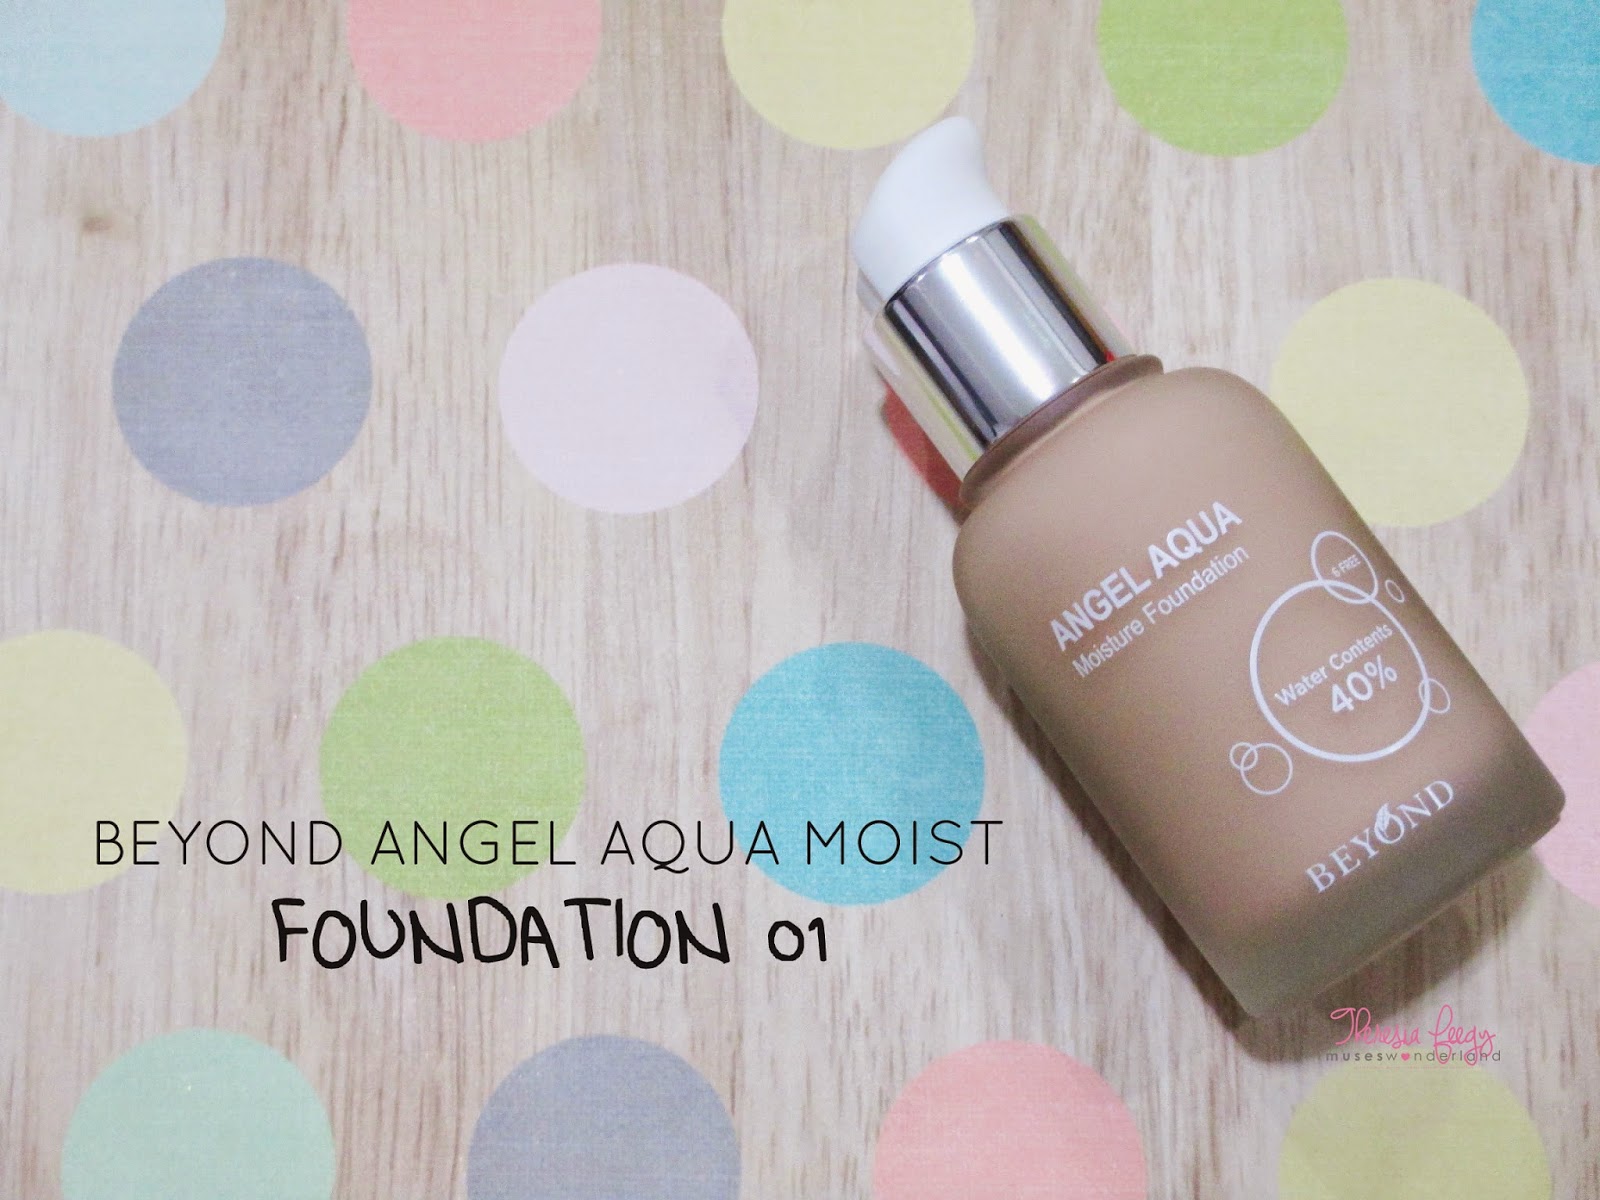 BEYOND ANGEL AQUA FOUNDATION 01 REVIEW, SWATCH, FOTD AND RESULTS + A SURPRI...